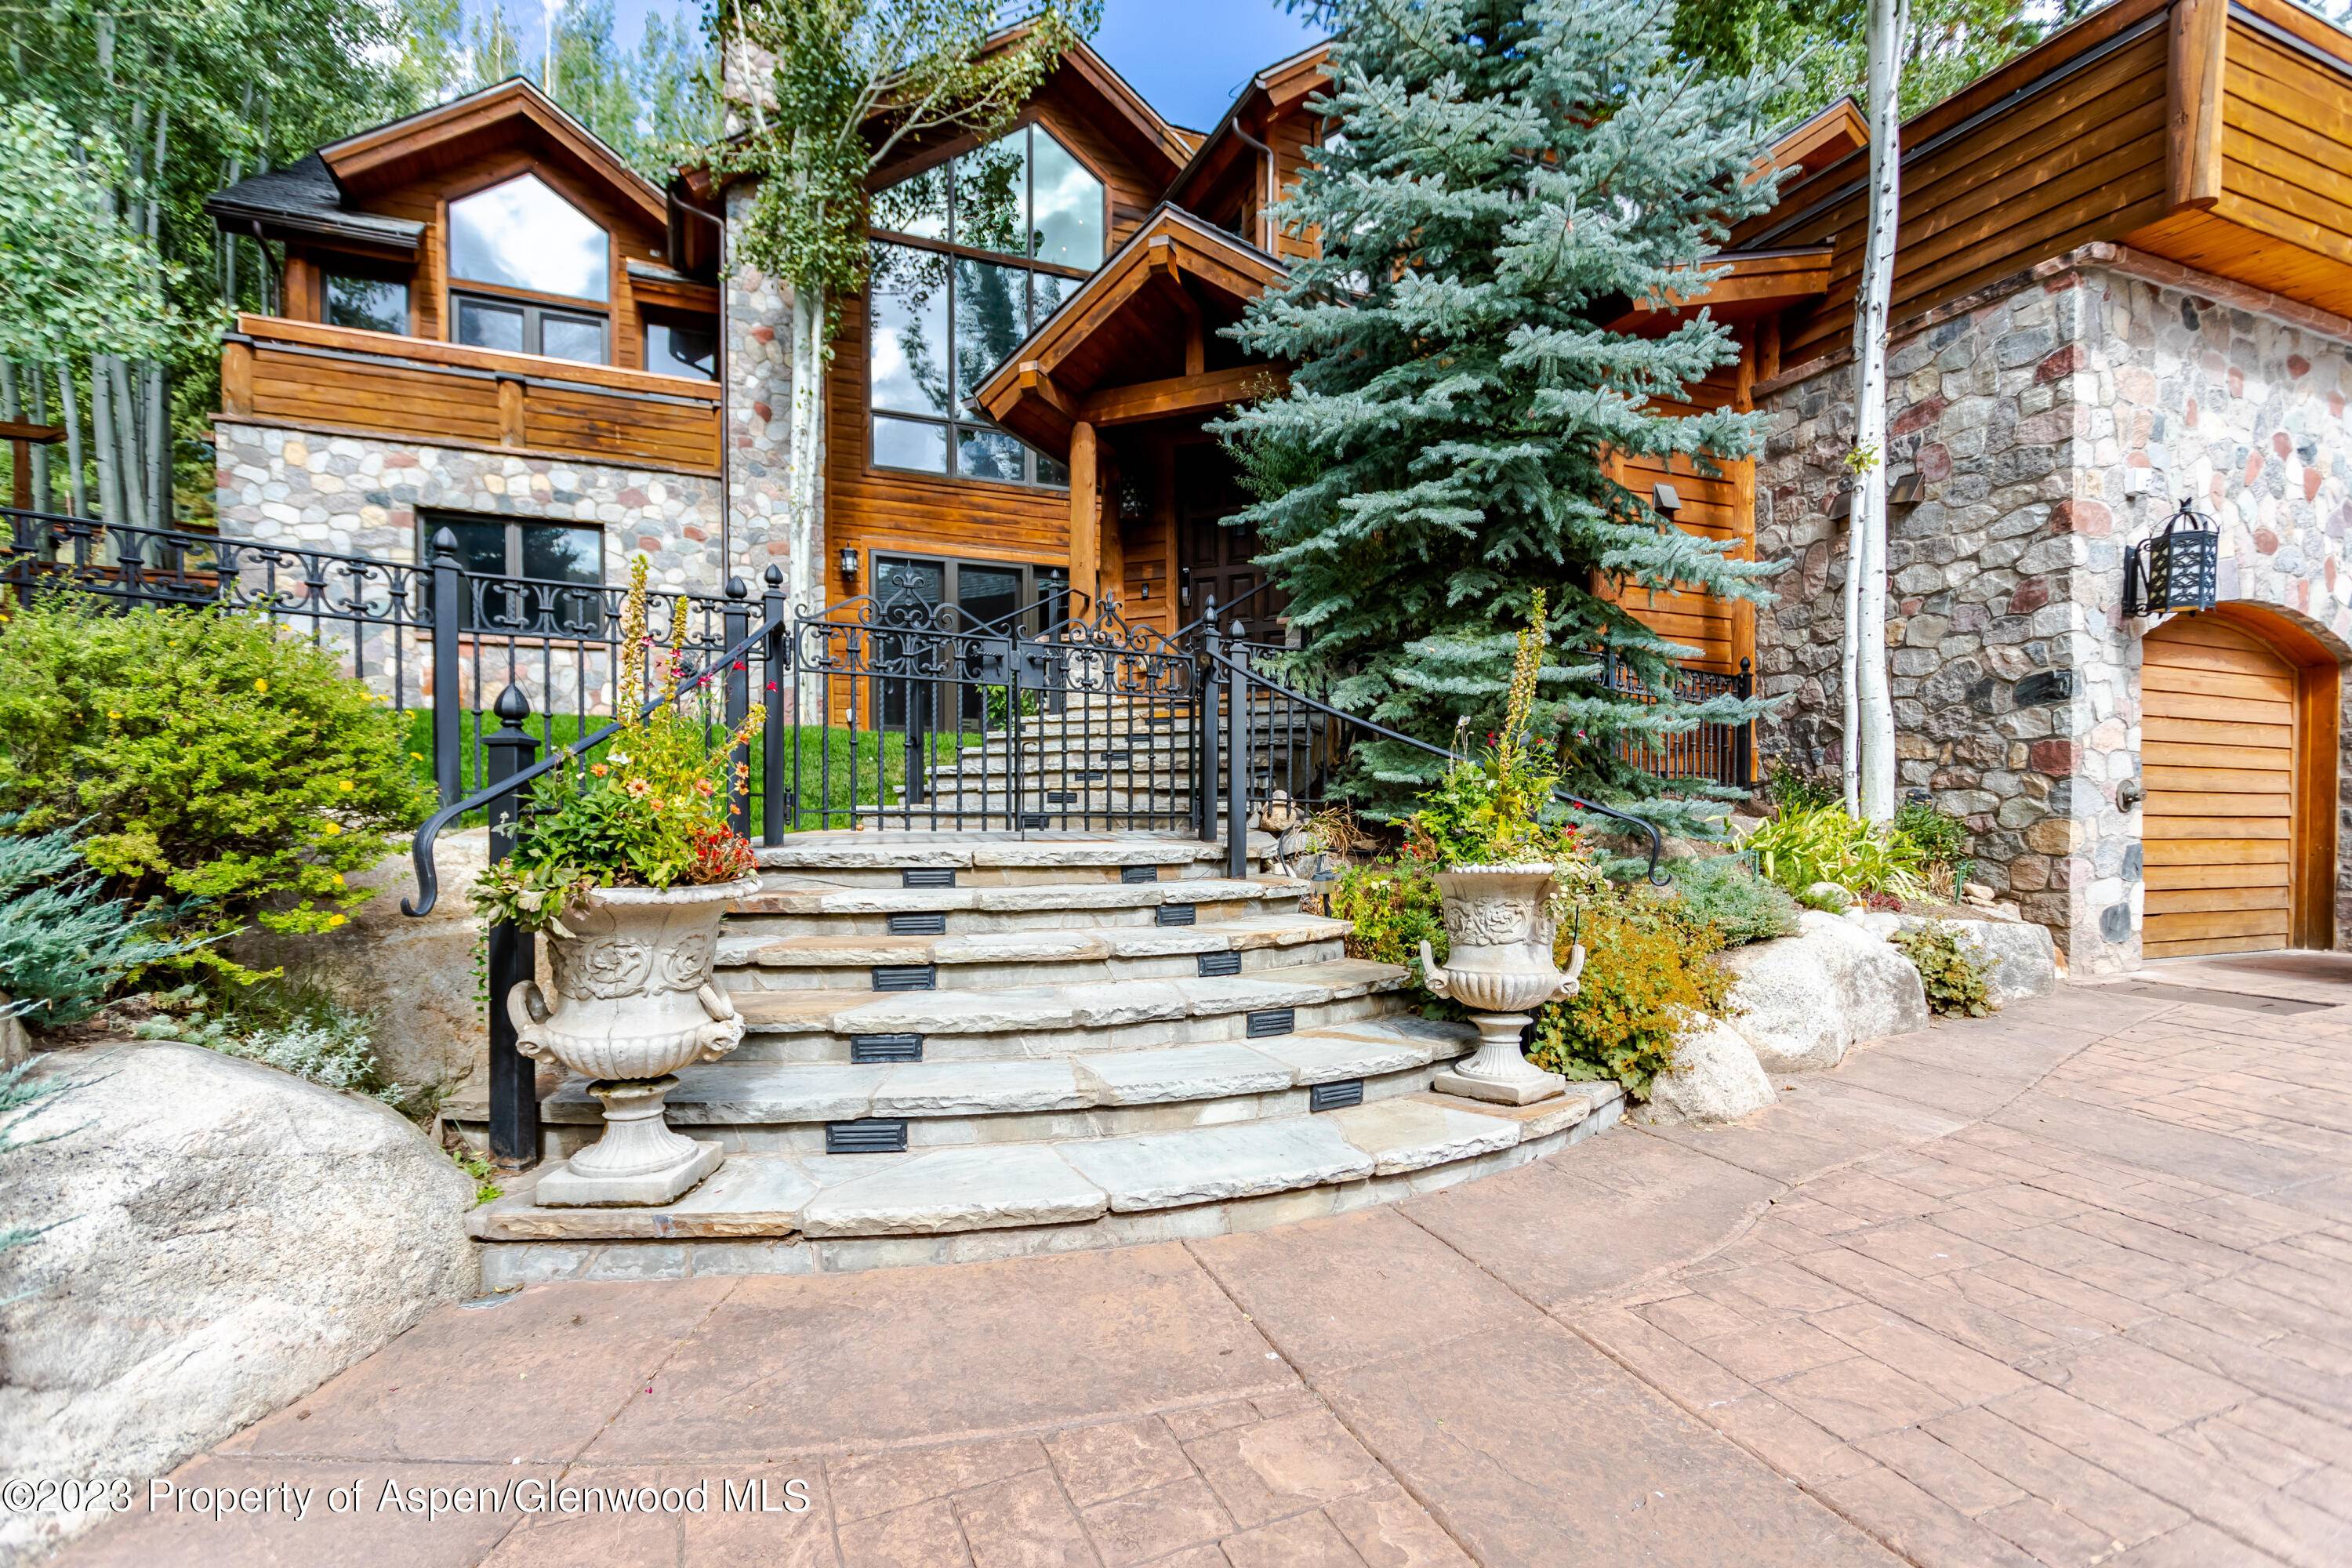 Welcome to our exquisite Aspen retreat, Silver Mountain Villa, where opulence meets alpine charm in this meticulously remodeled luxury vacation rental.